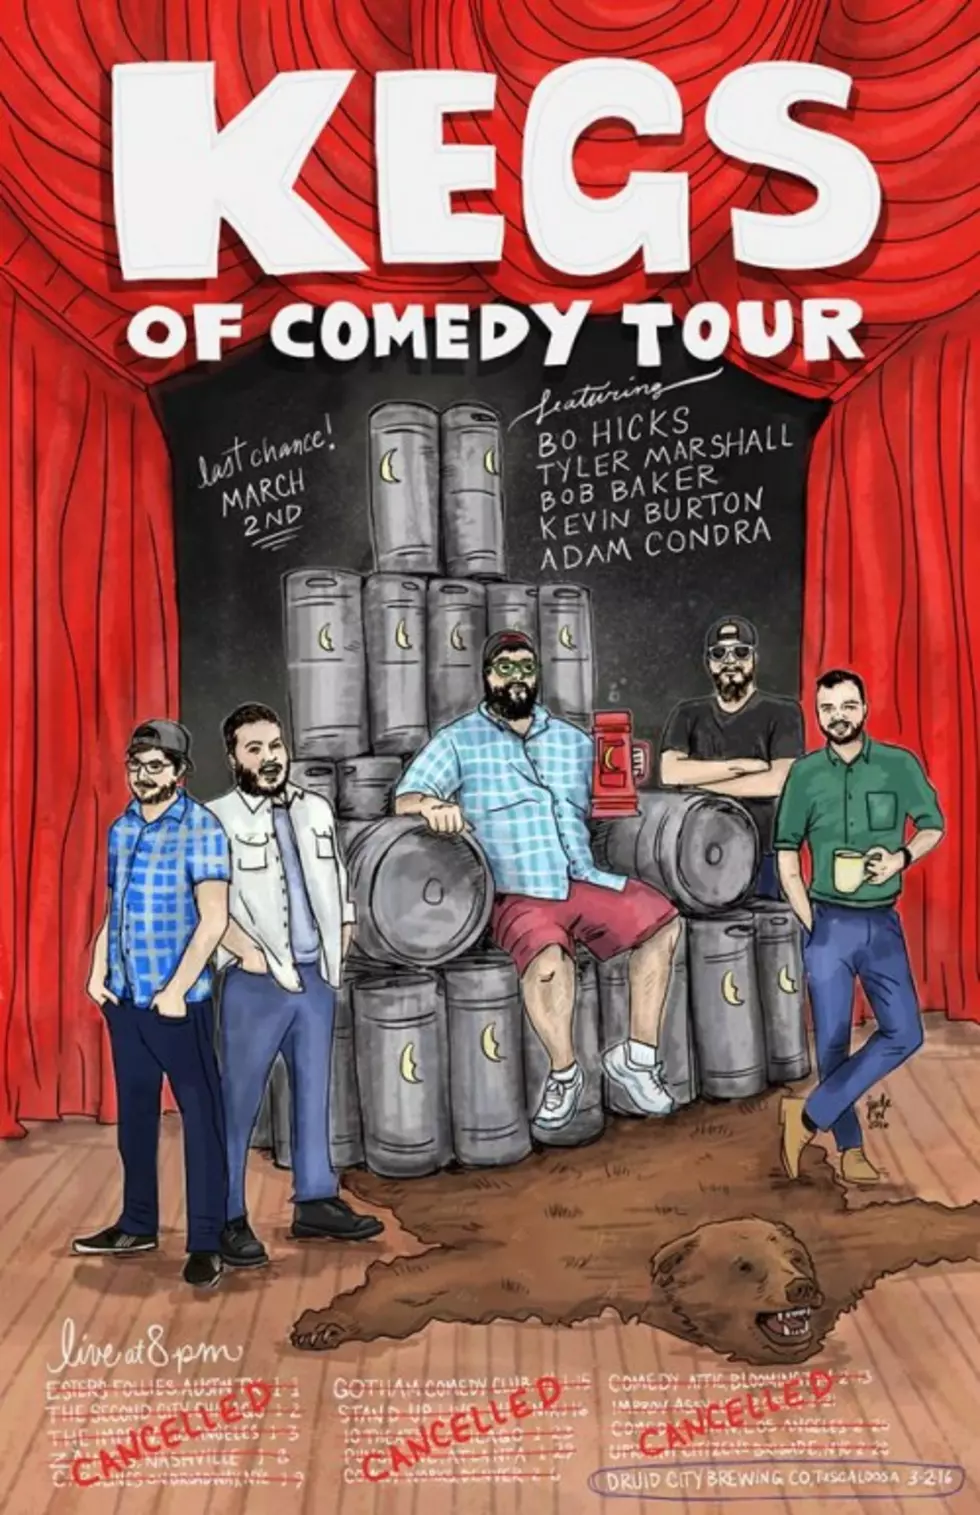 Kegs of Comedy Tour Coming to Local Brewery